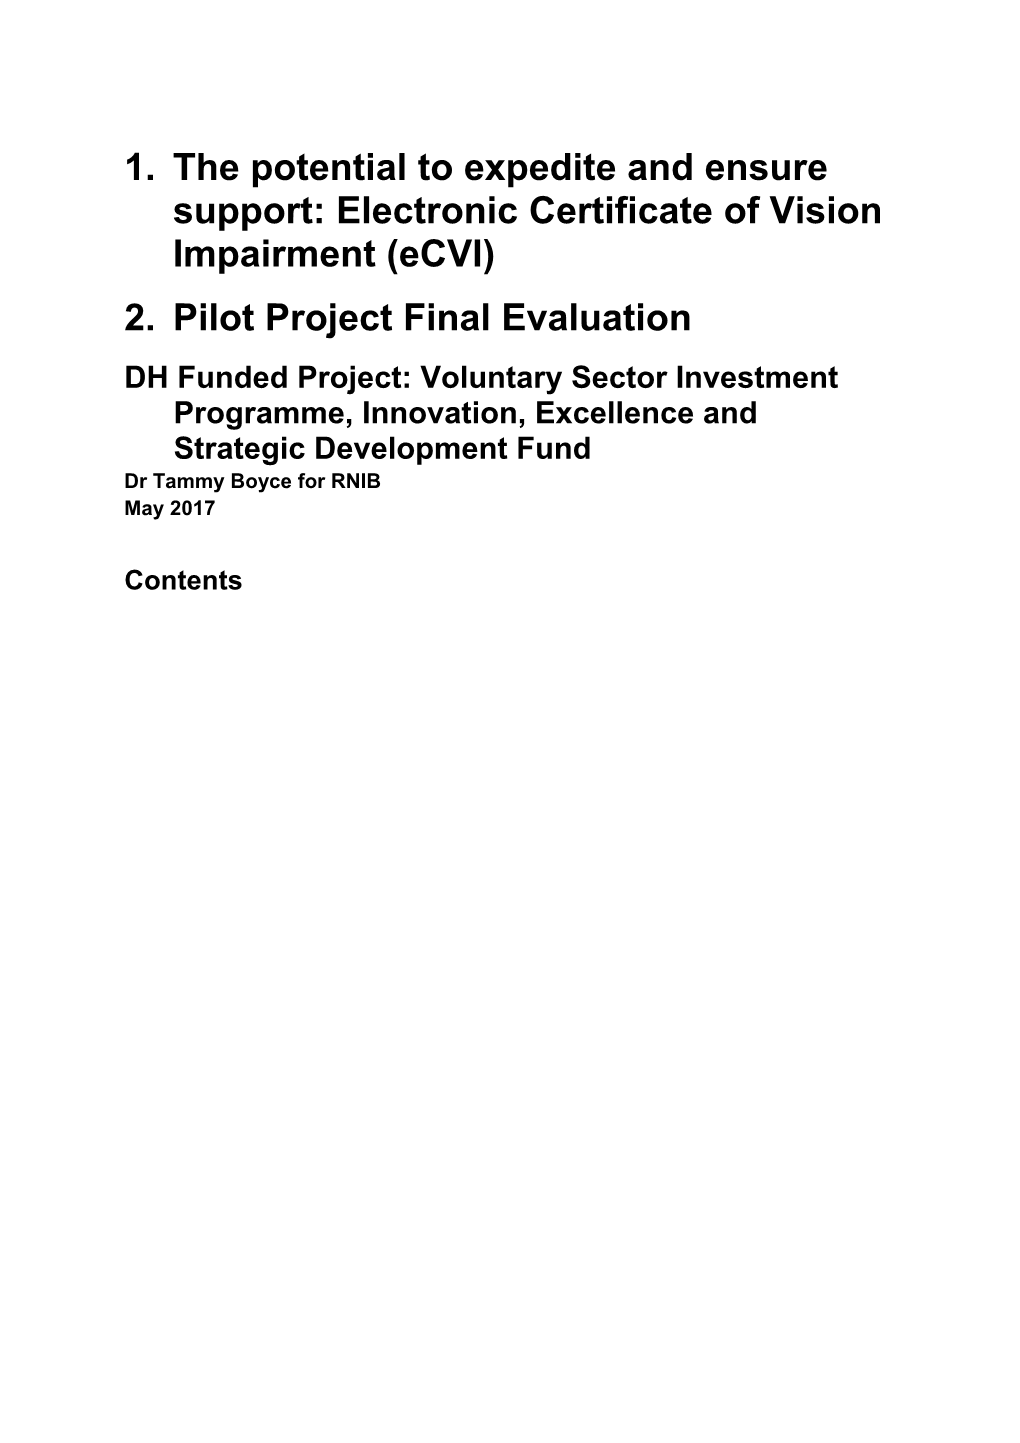 The Potential to Expedite and Ensure Support: Electronic Certificate of Vision Impairment (Ecvi)